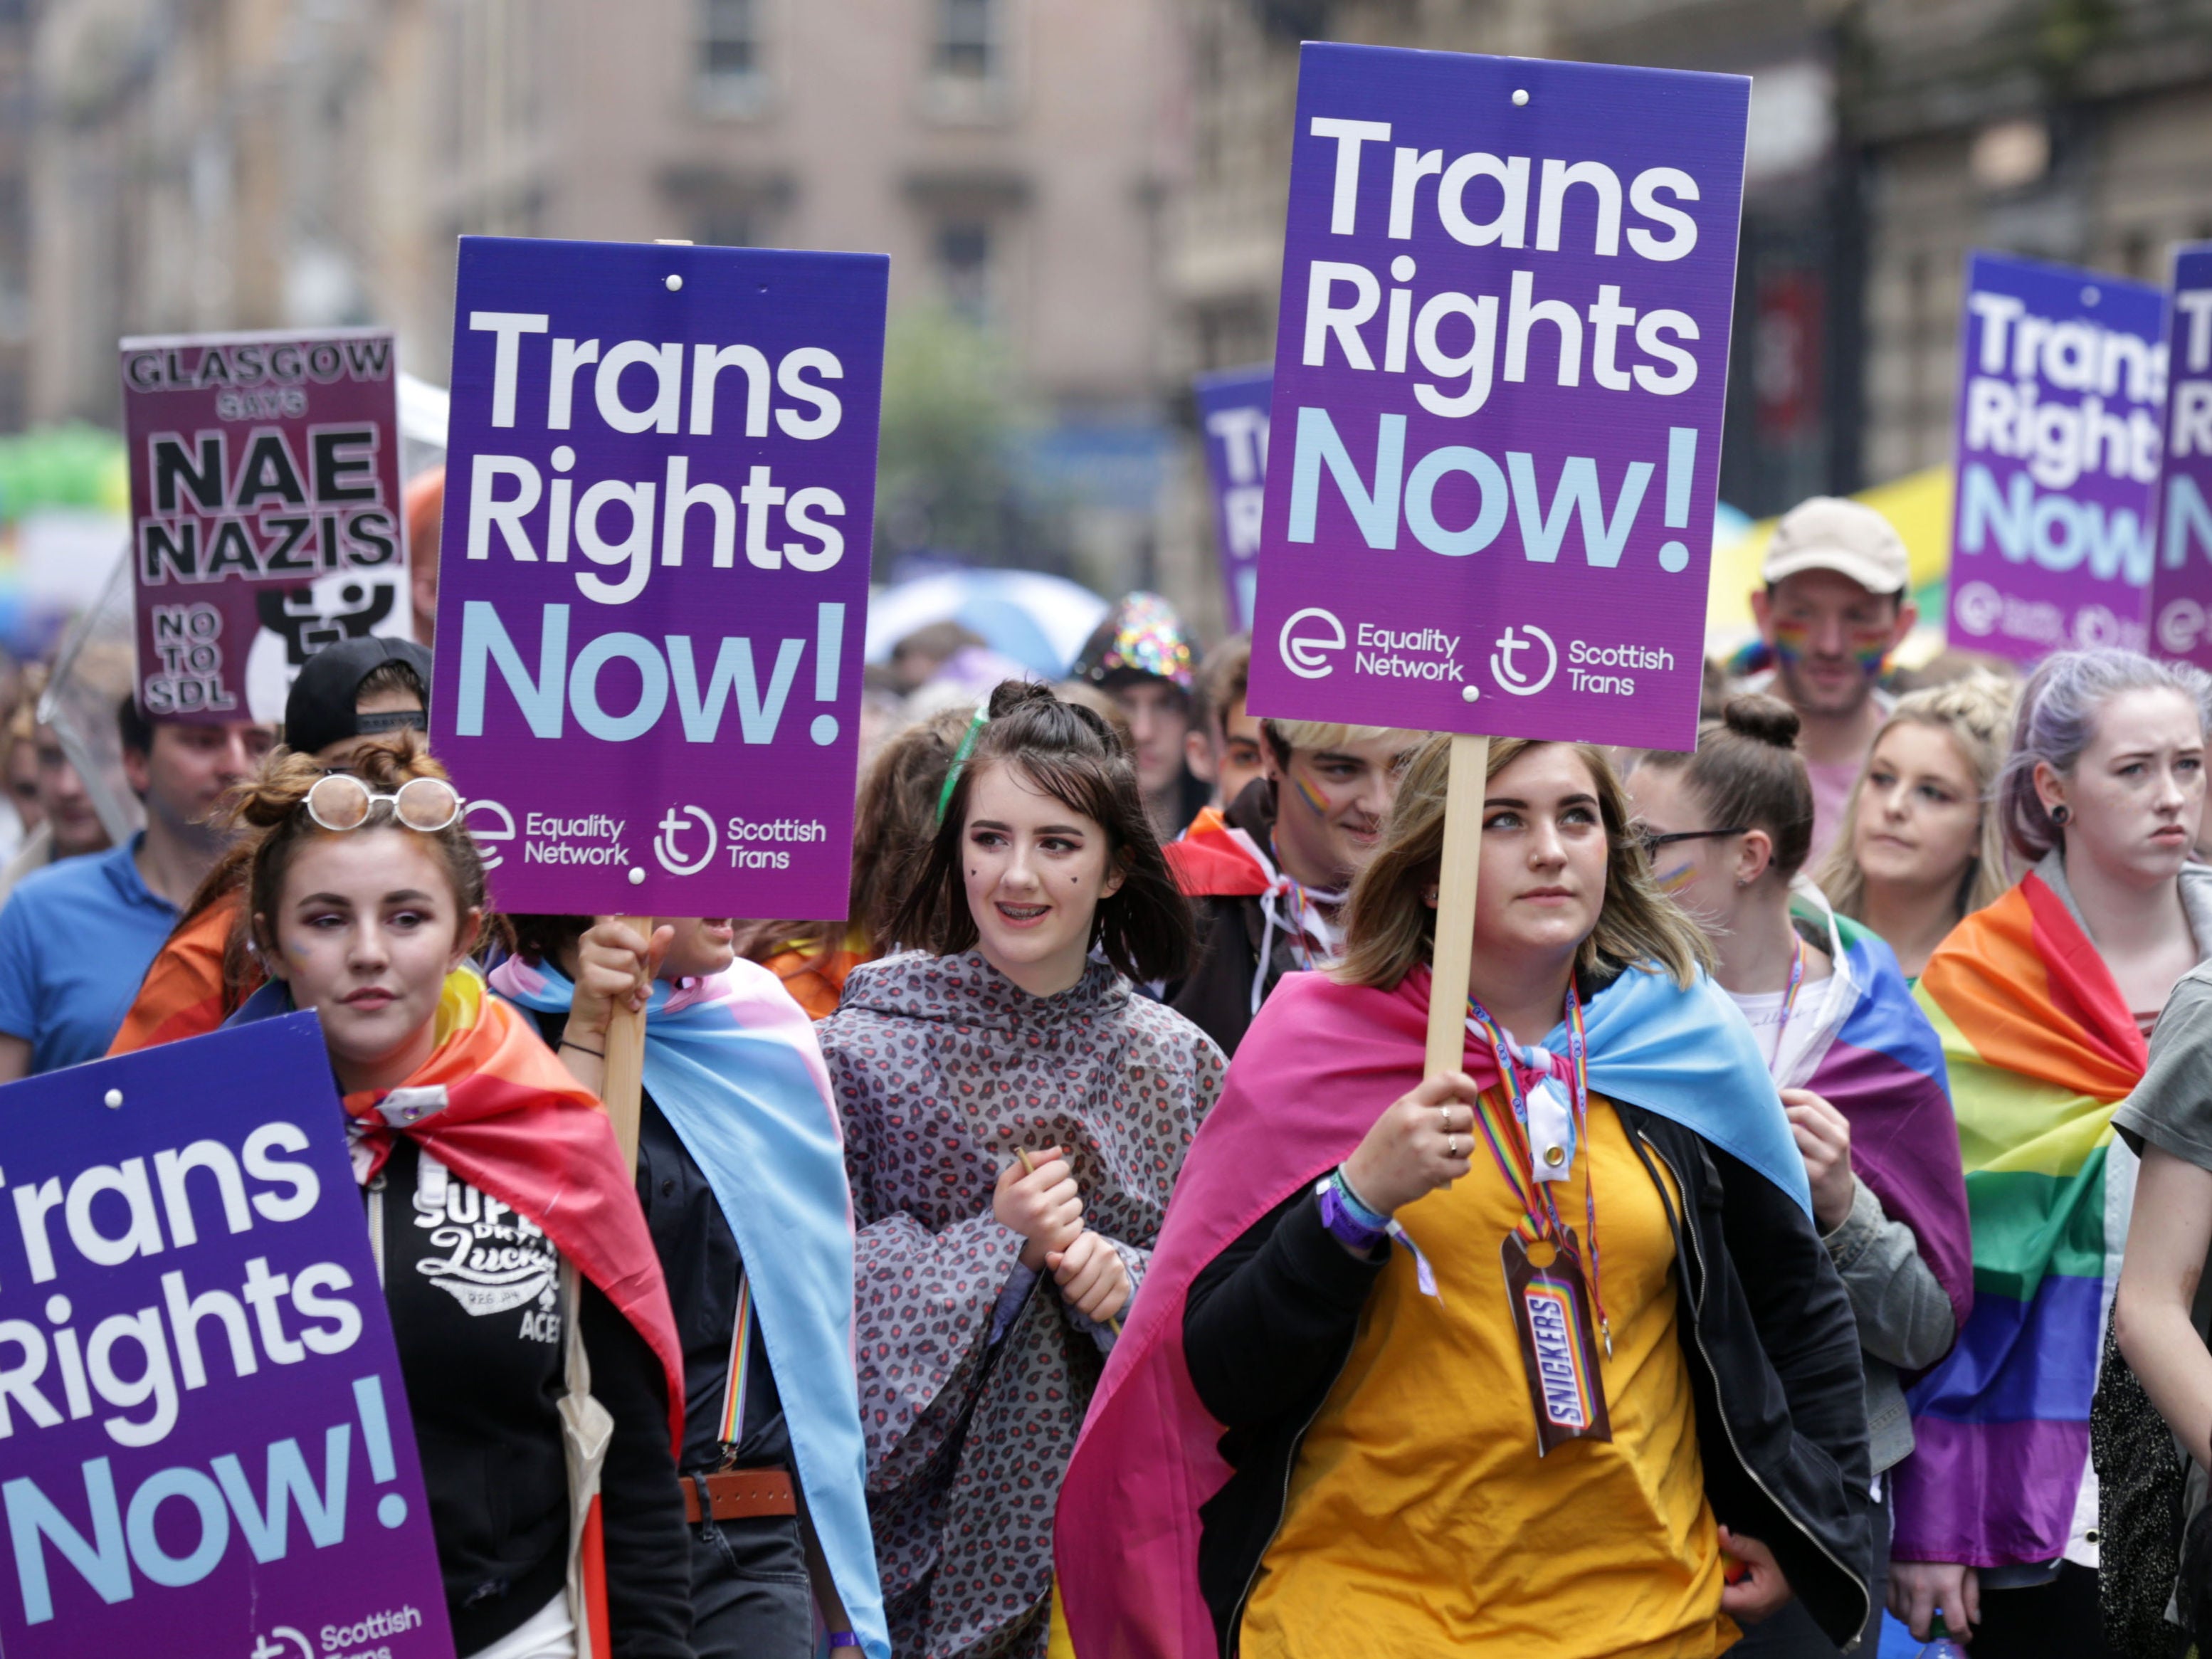 People protesting for Trans rights take part in the Pride parade in Glasgow